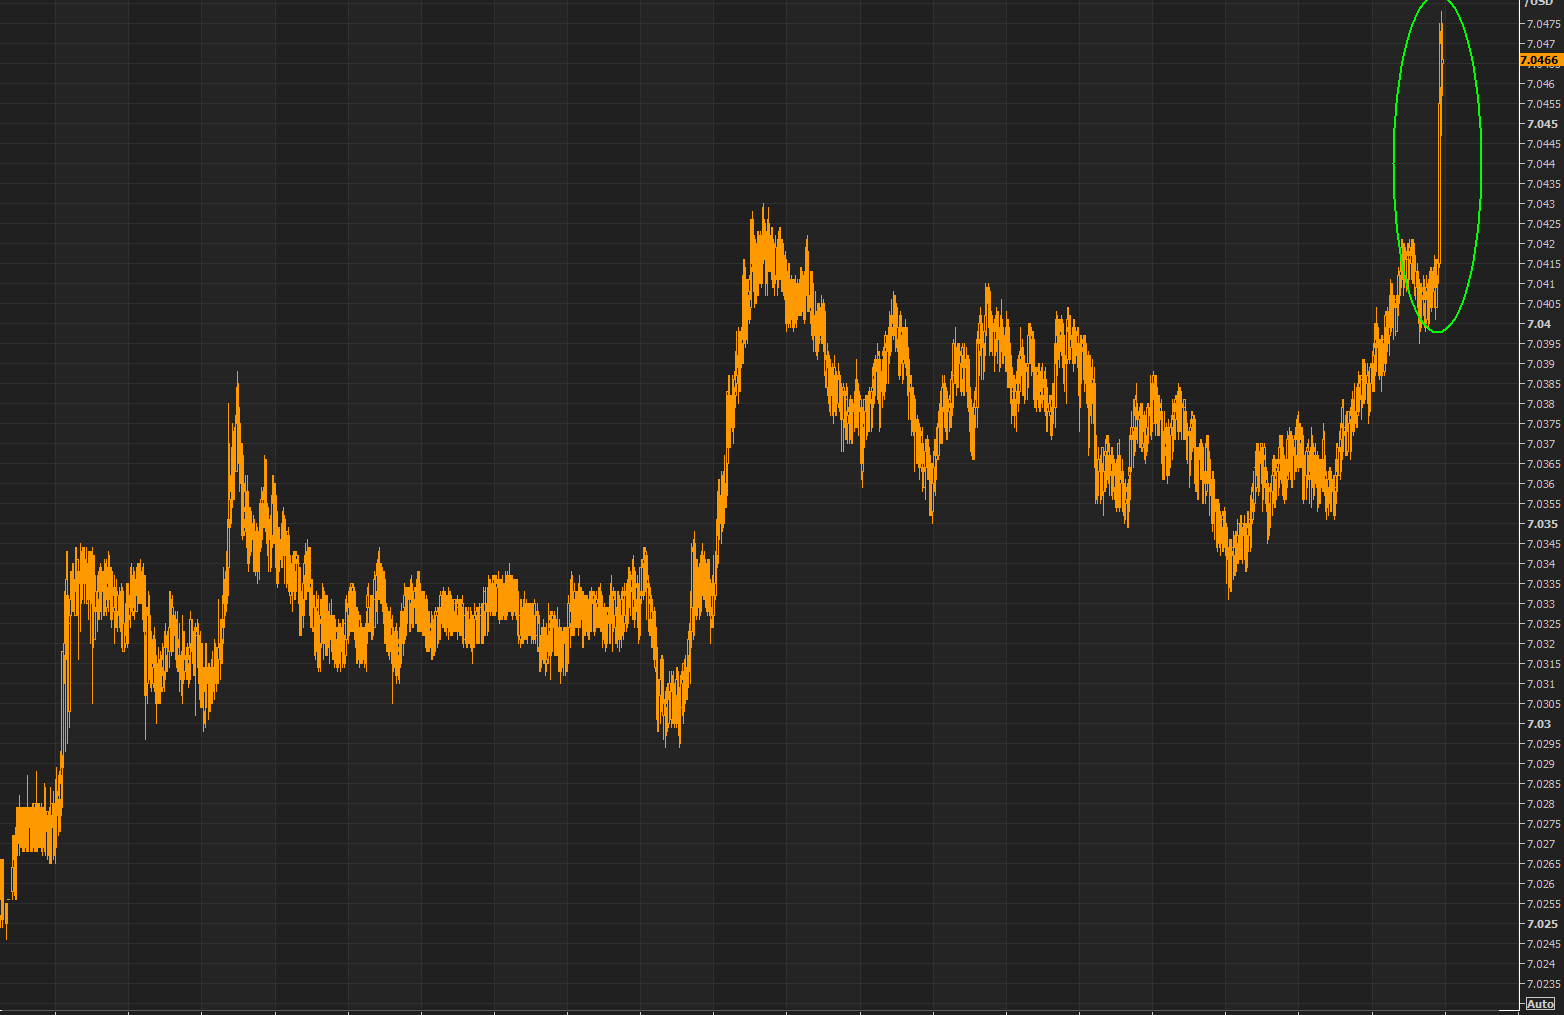 Yuan moving on the back of those headlines, last 7.046